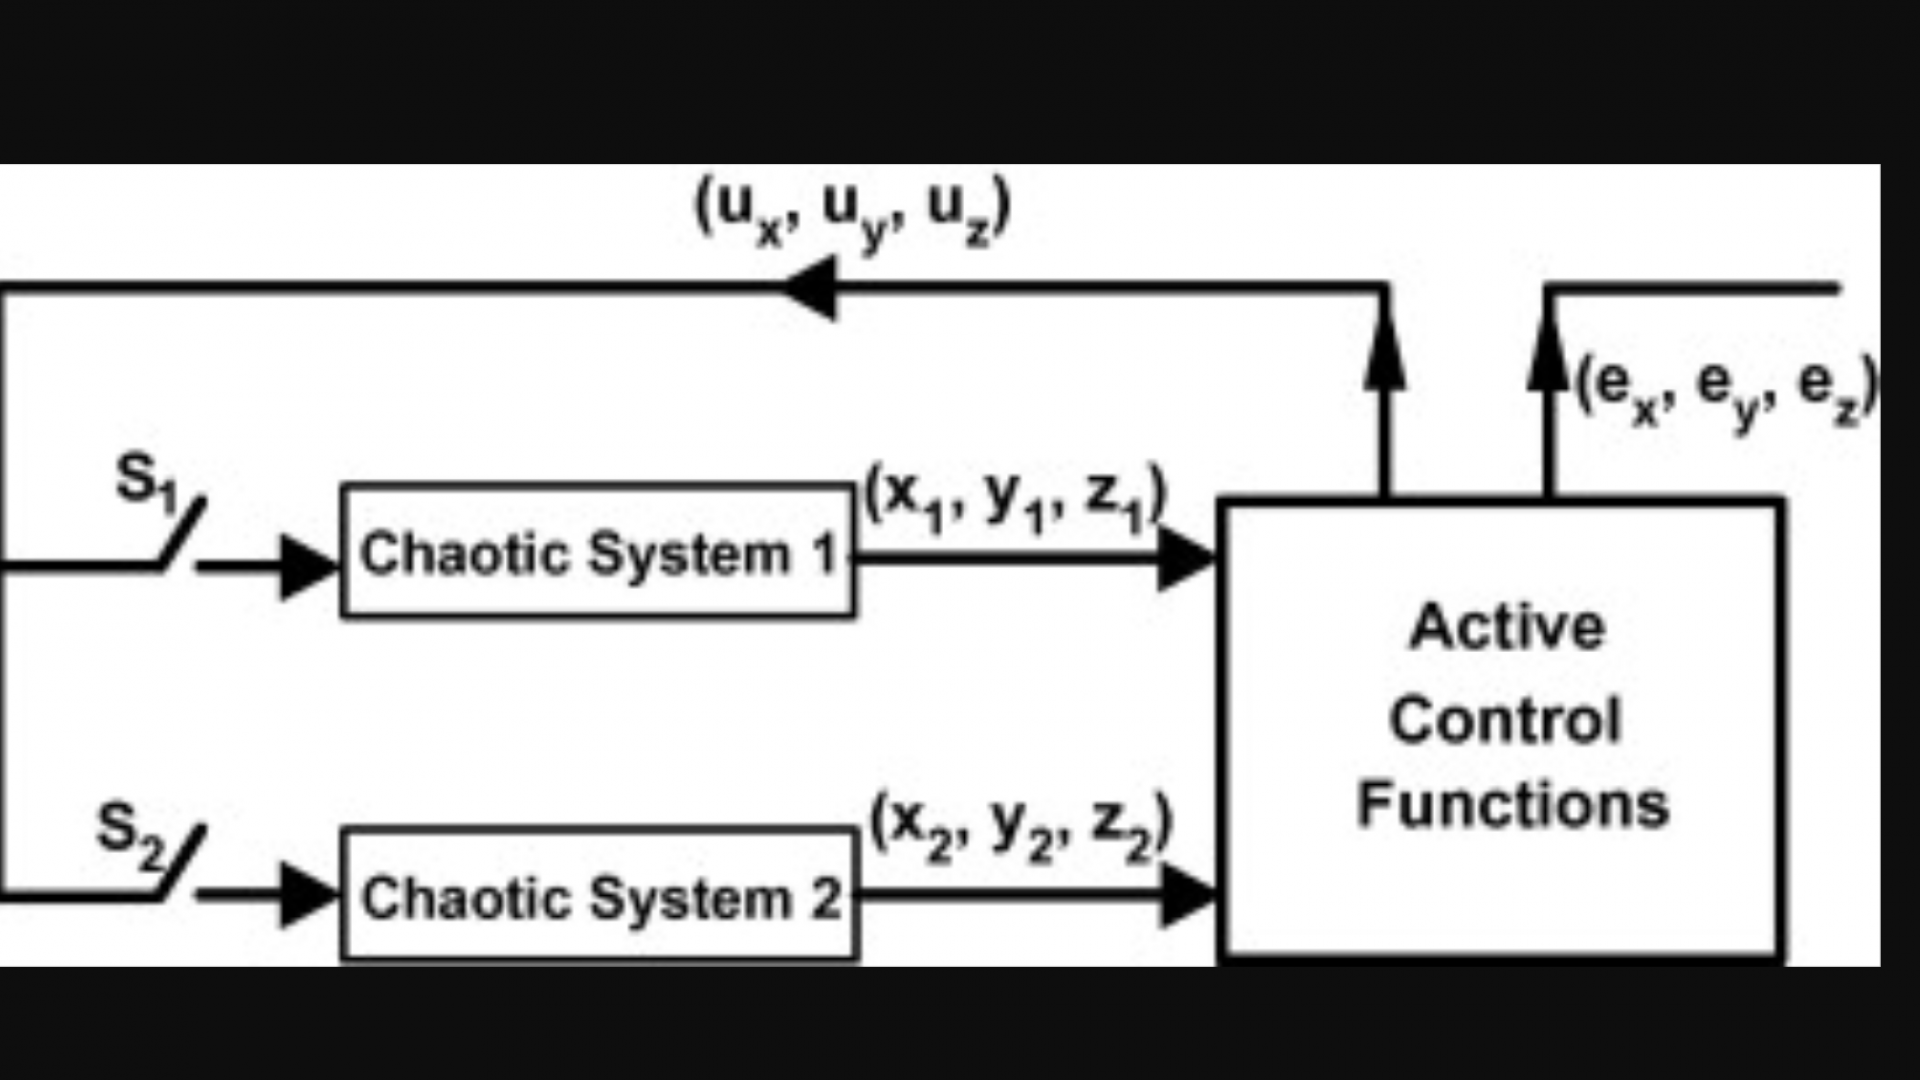 Control and switching synchronization of fractional order chaotic systems using active control technique